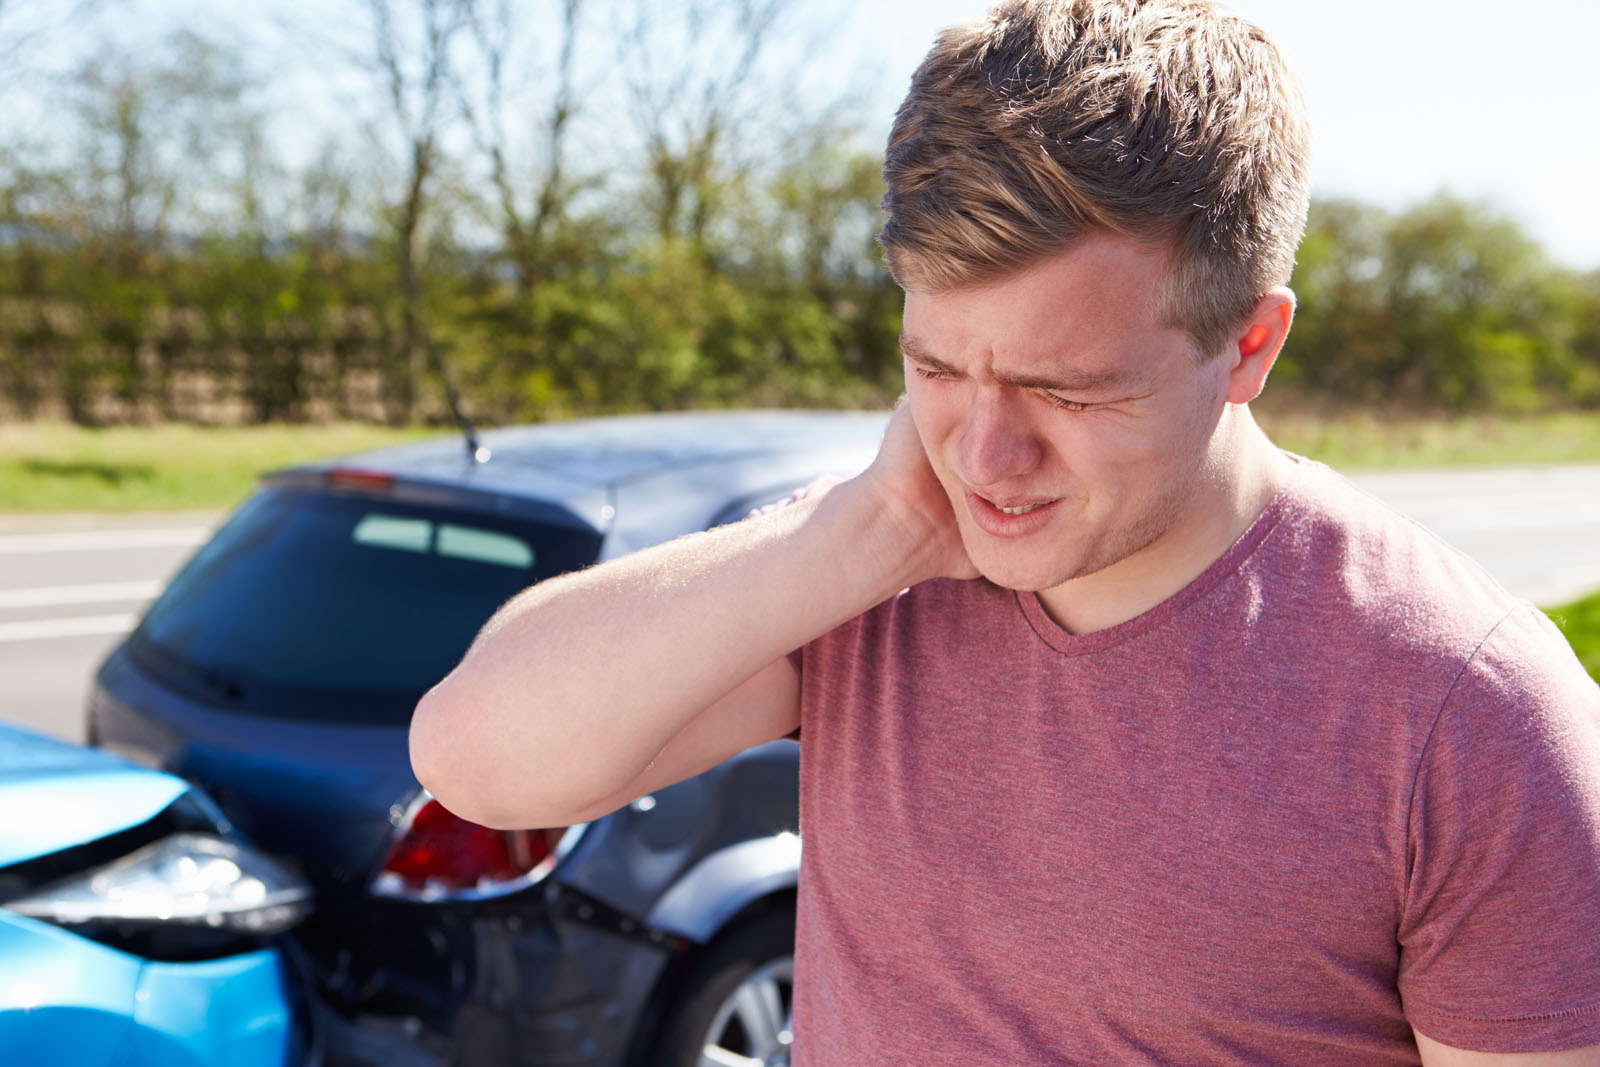 if you have been in auto accident injury in grand rapids visit our auto accident injury chiropractors